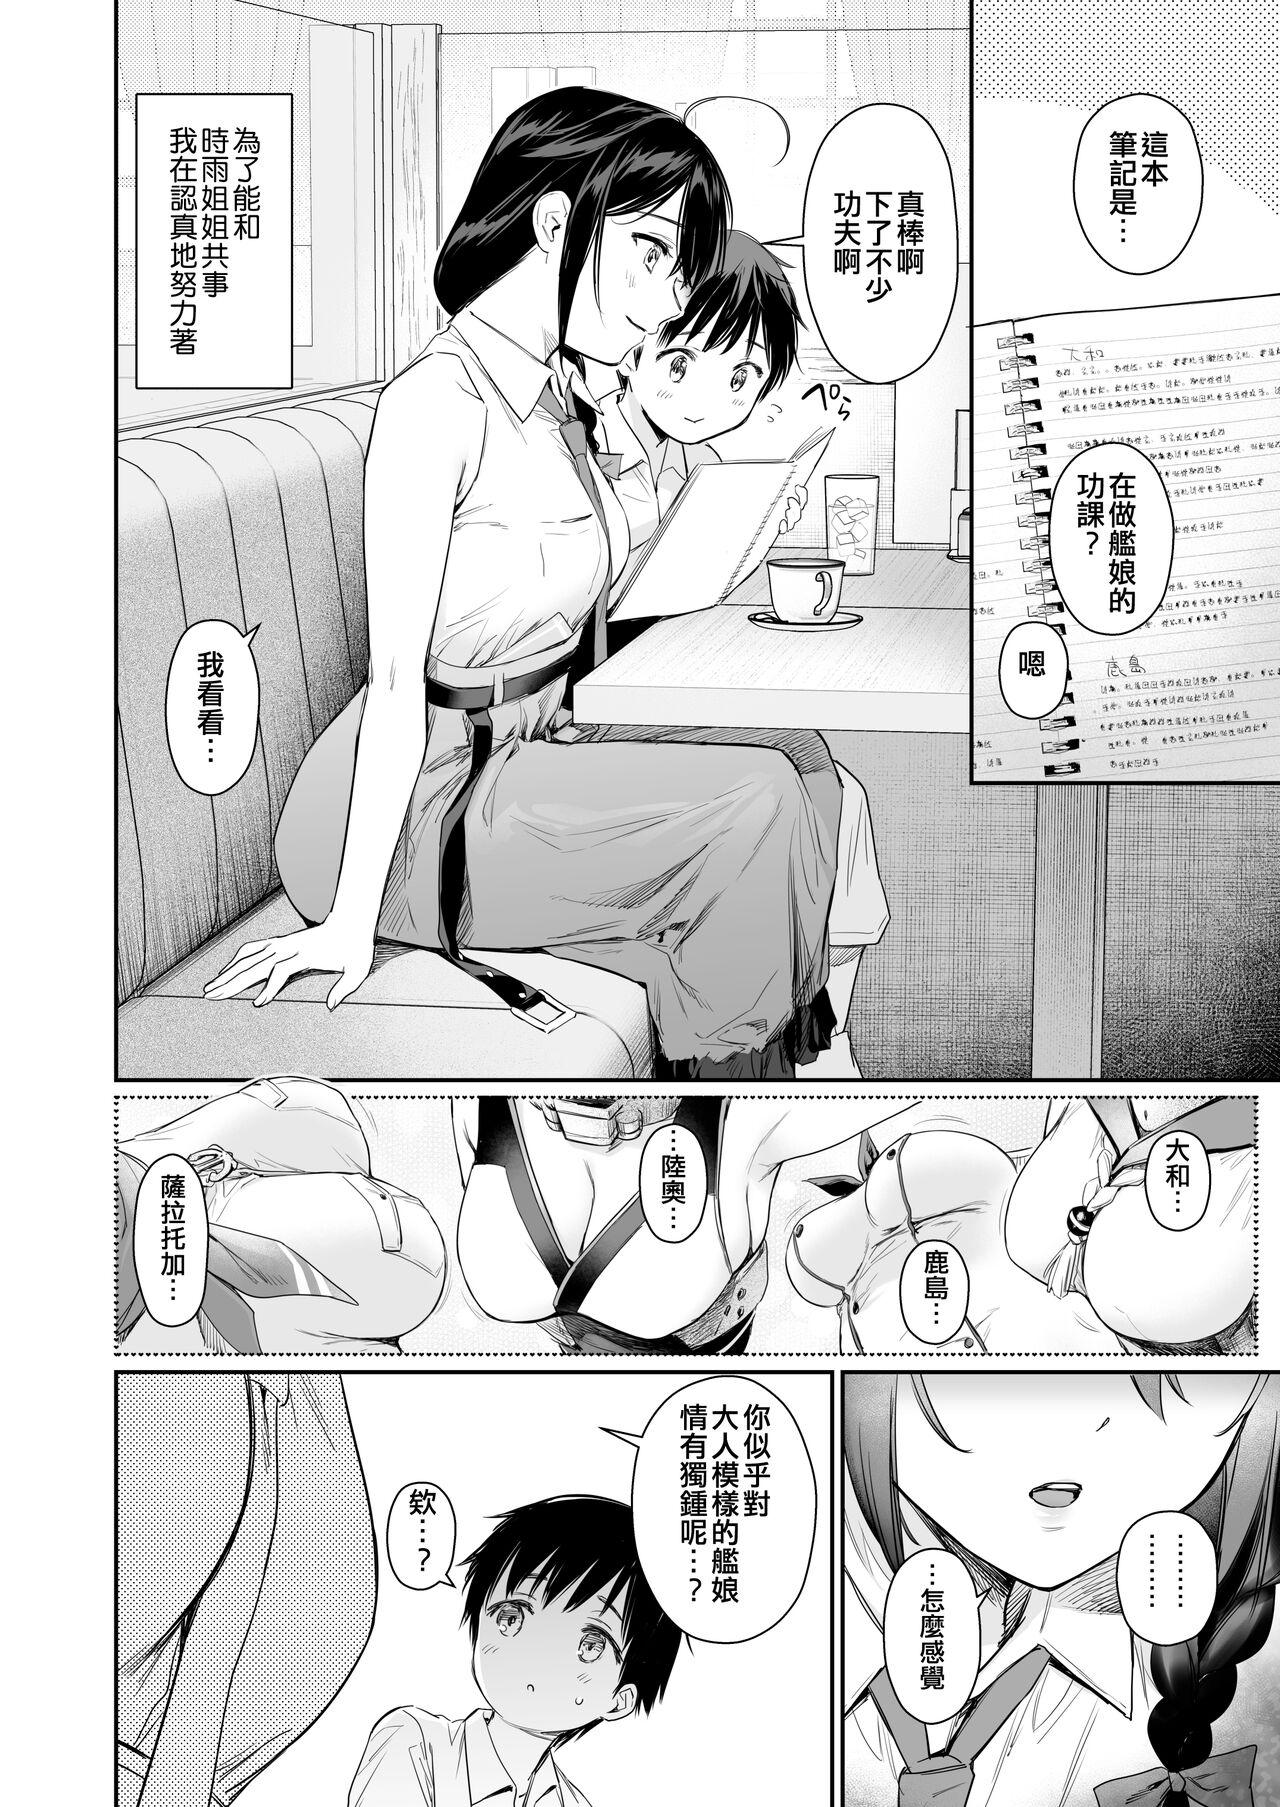 Money Talks Shigure Bedwetter 4 - Kantai collection Eating Pussy - Page 4